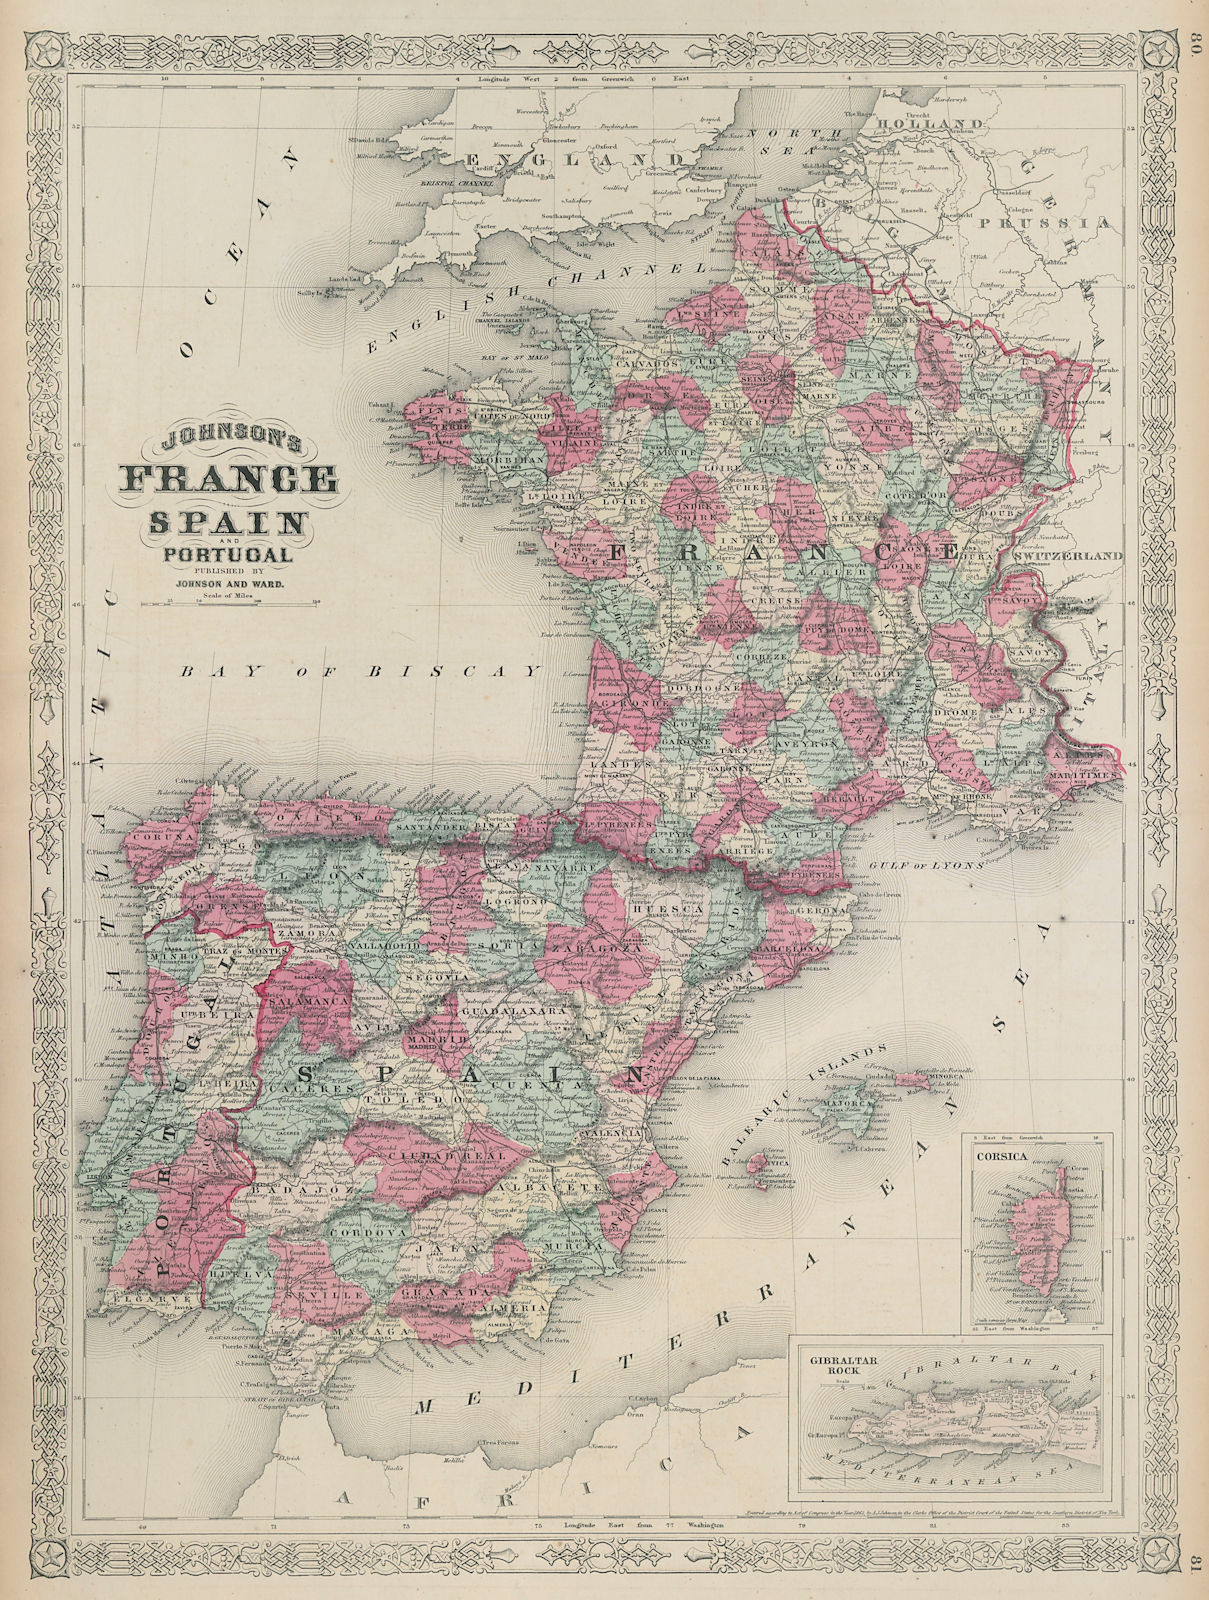 Associate Product Johnson's France, Spain and Portugal. Corsica Gibraltar Iberia 1865 old map